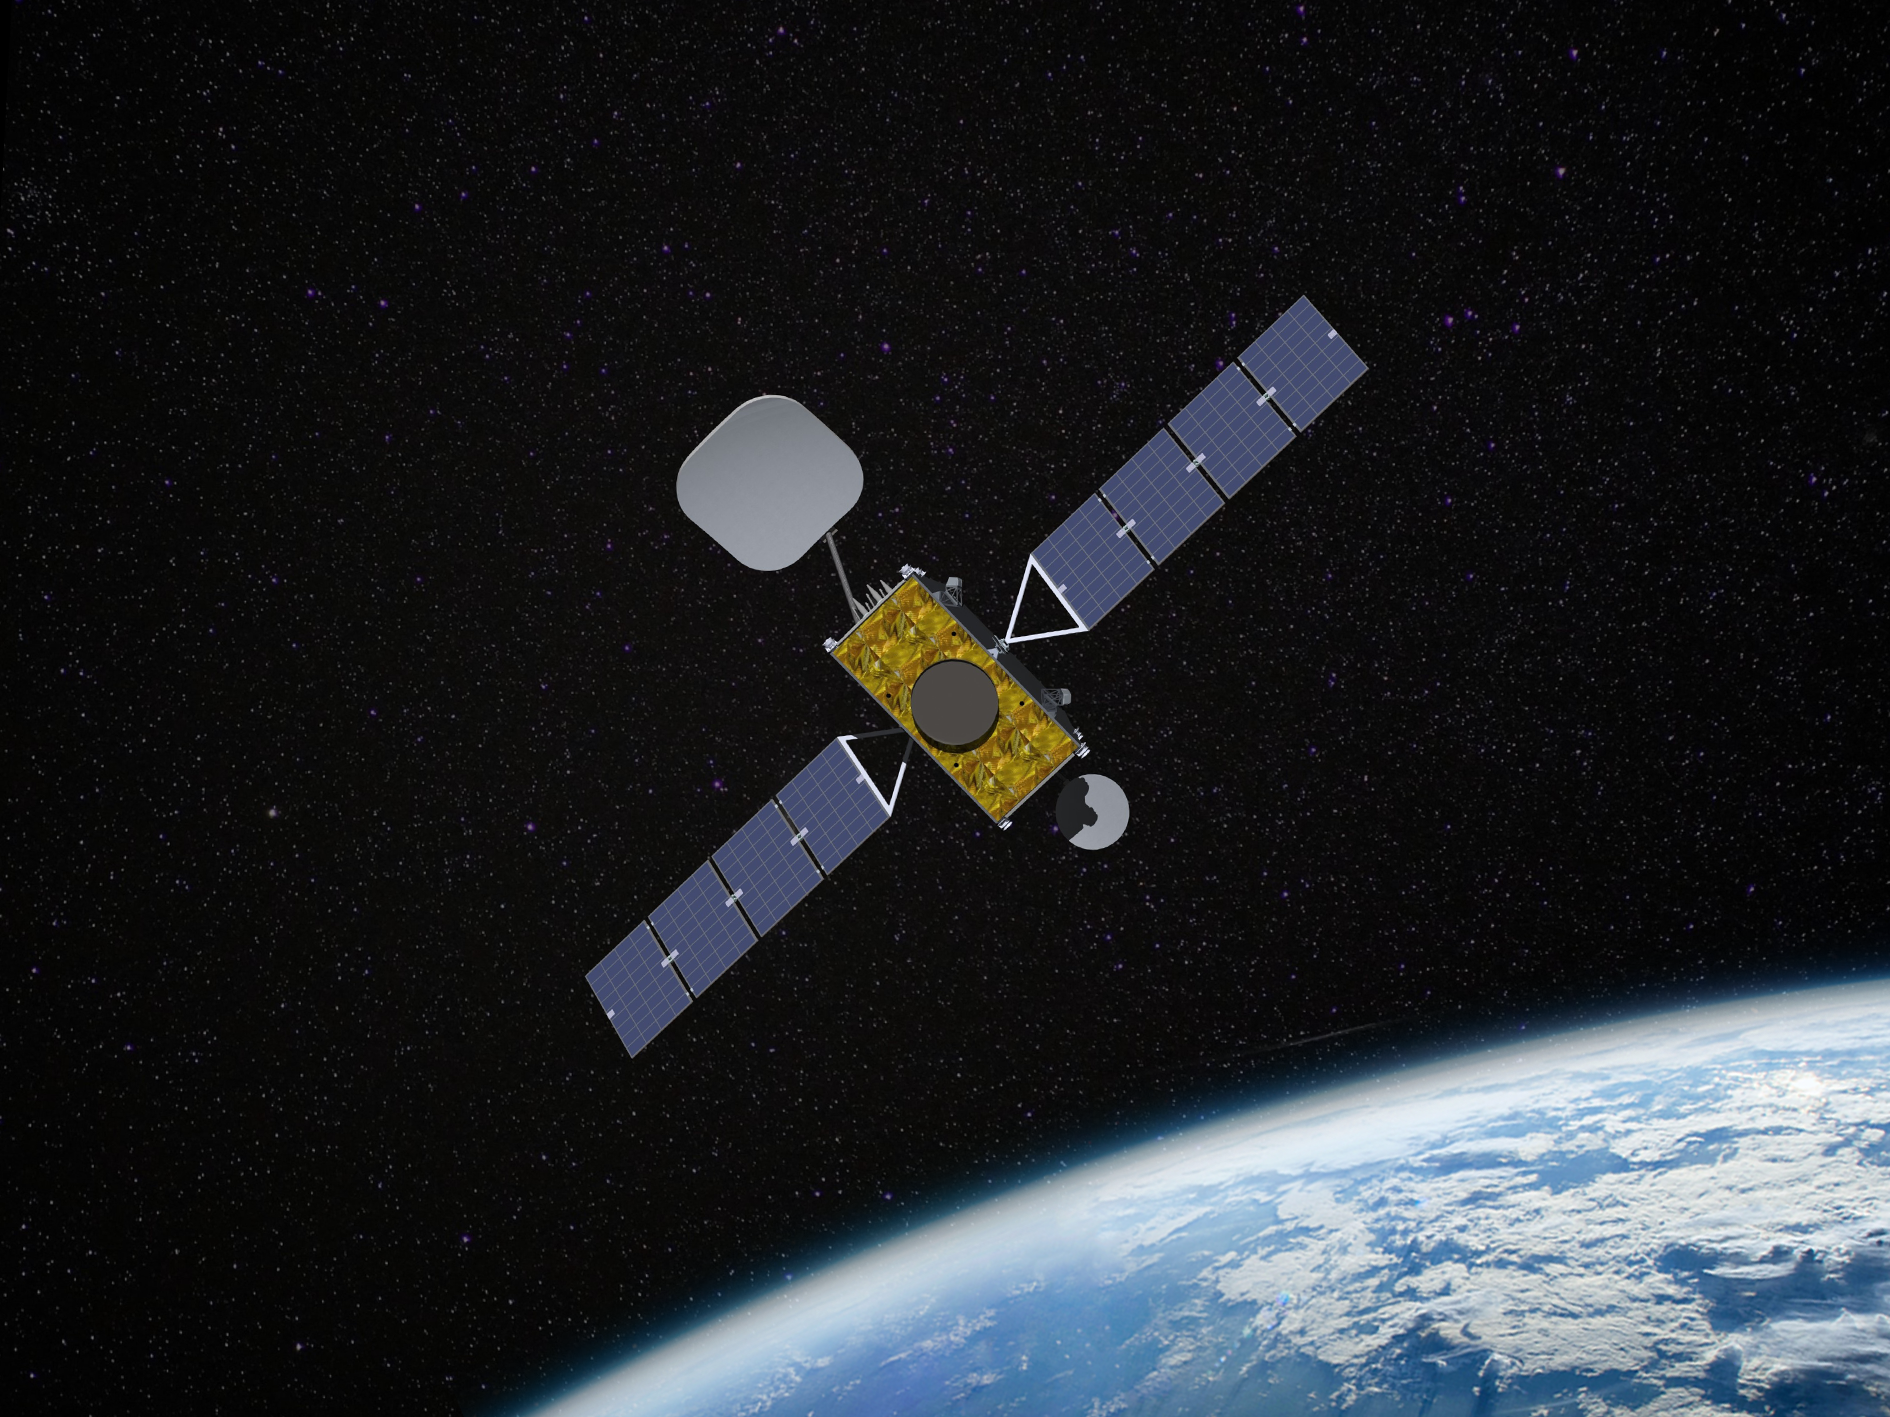 Inmarsat selects SWISSto12’s HummingSat for I-8 Satellites to power L-band network